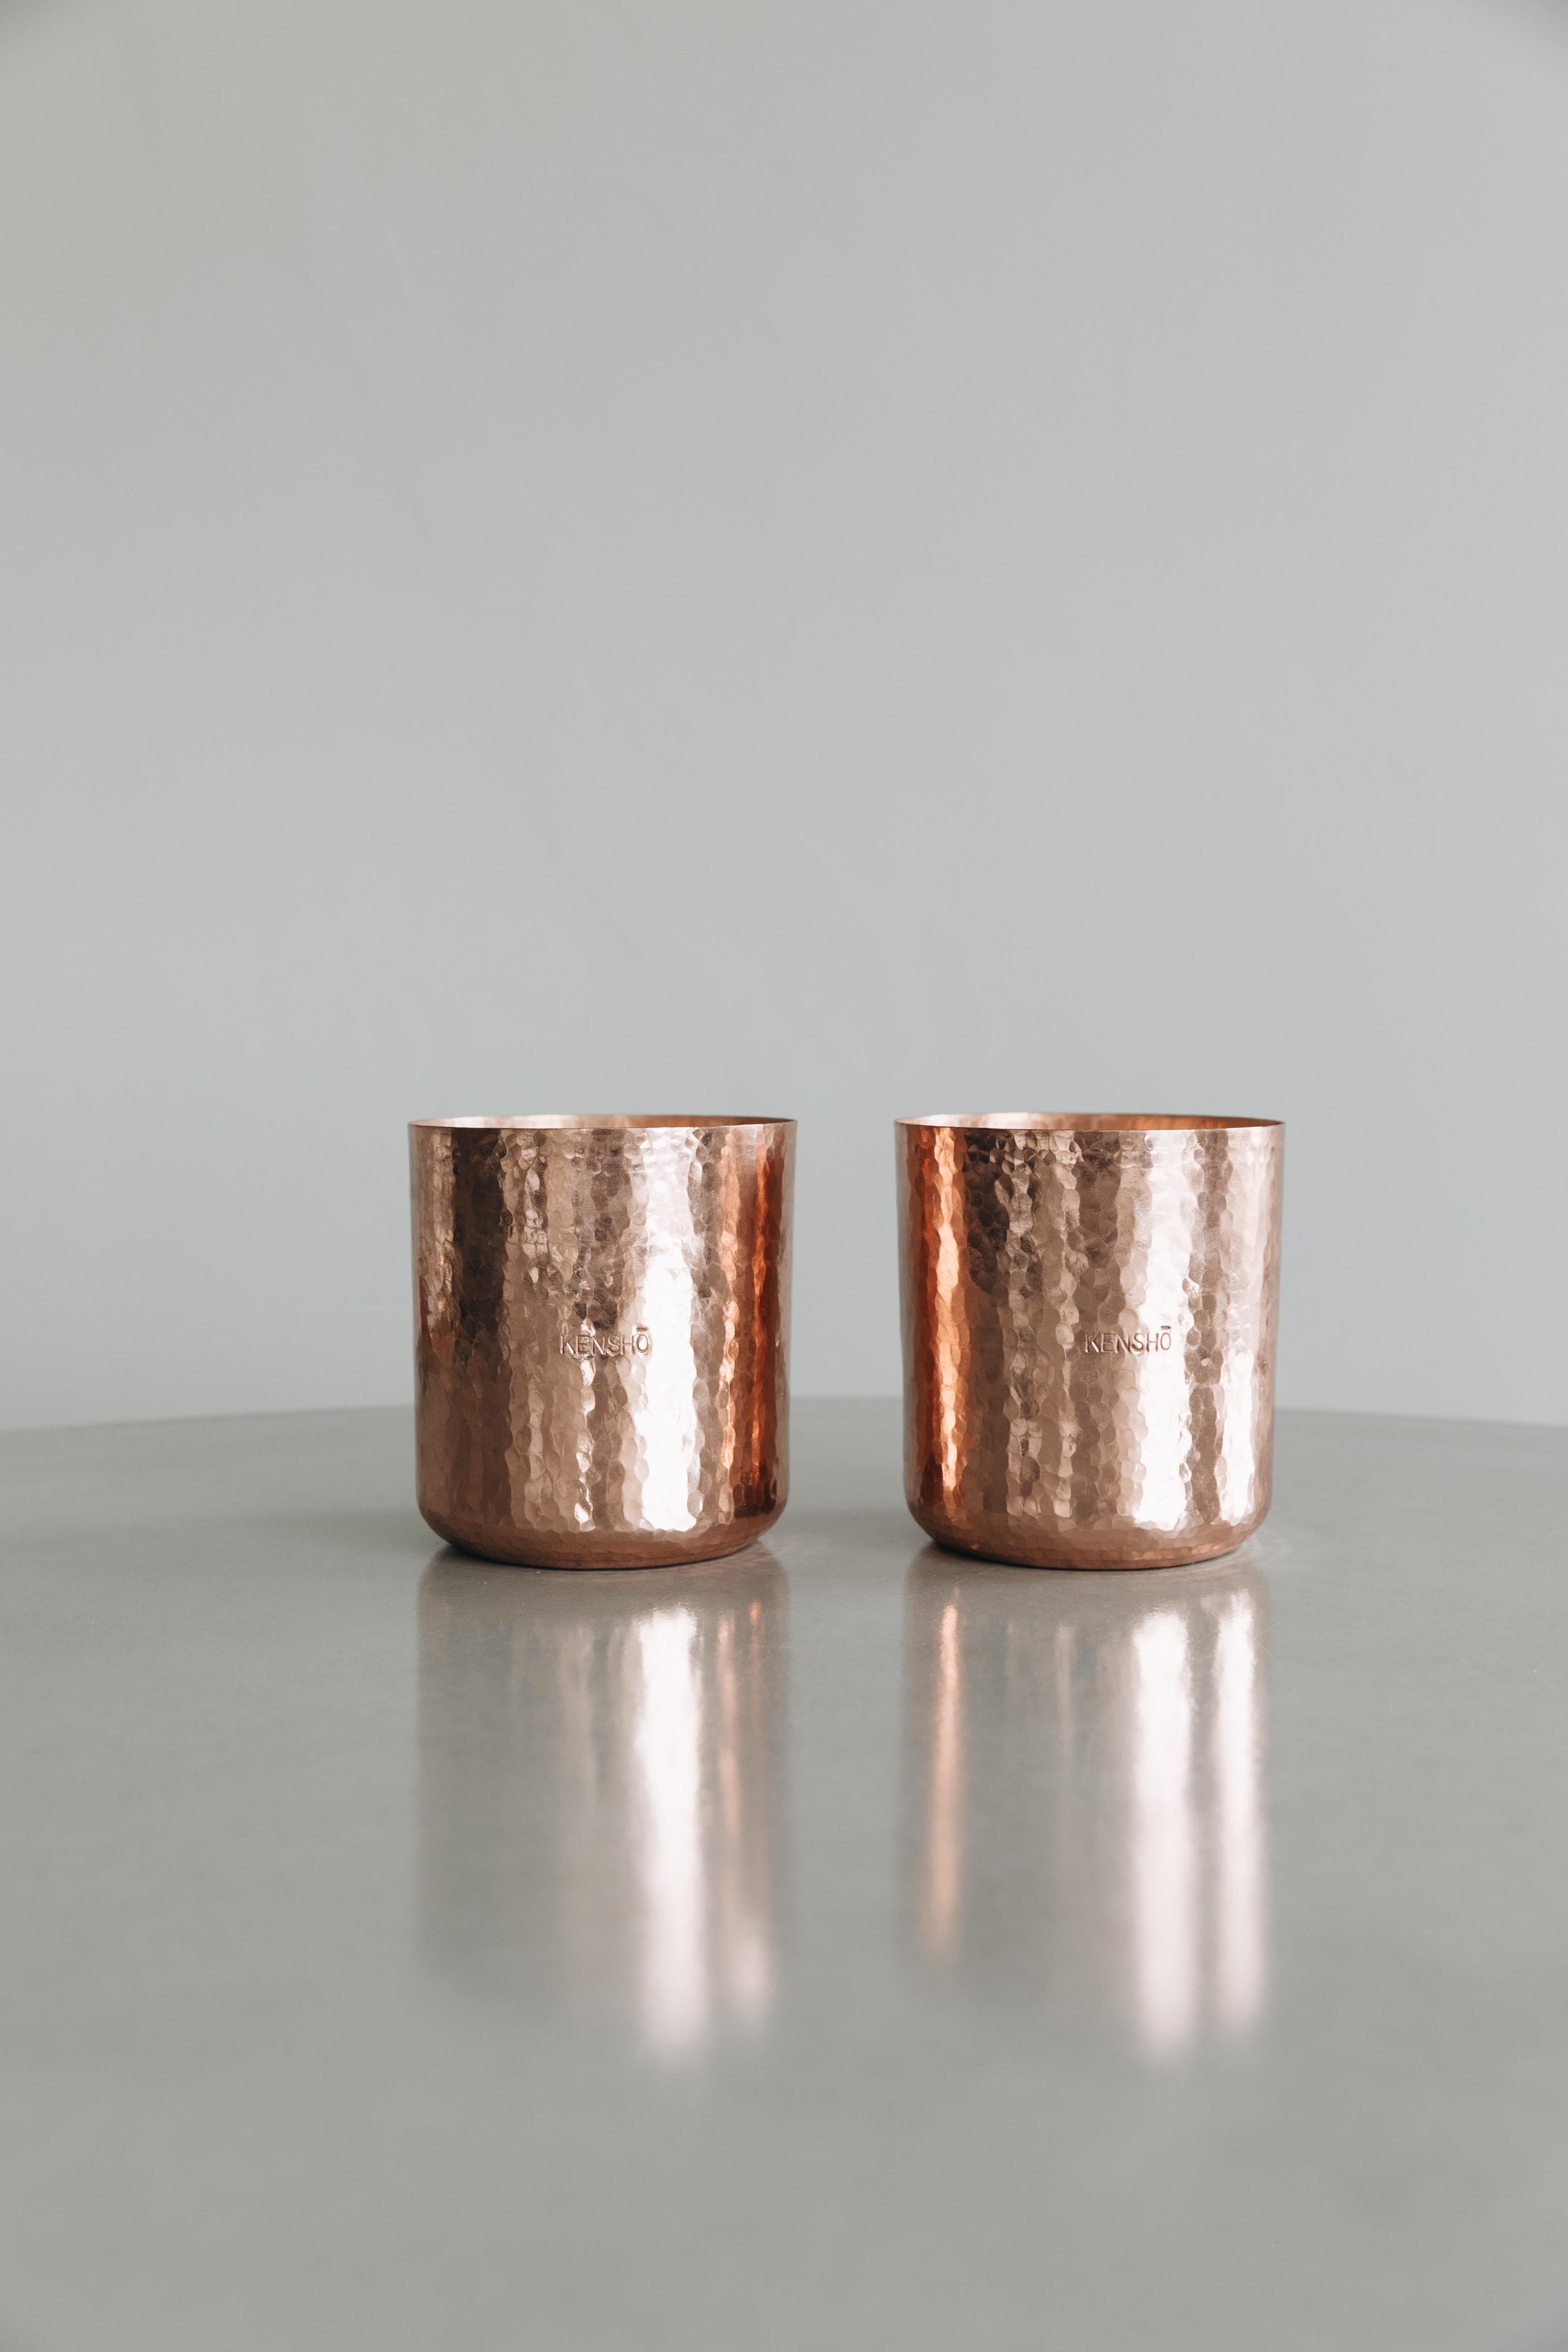 This stunning soy wax candle, crafted by skilled Mexican artisans, is a true work of art. The vase is made of hand-hammered copper, giving it an earthy, natural feel that fits perfectly with any home decor. Hand-hammered technique in copper is a